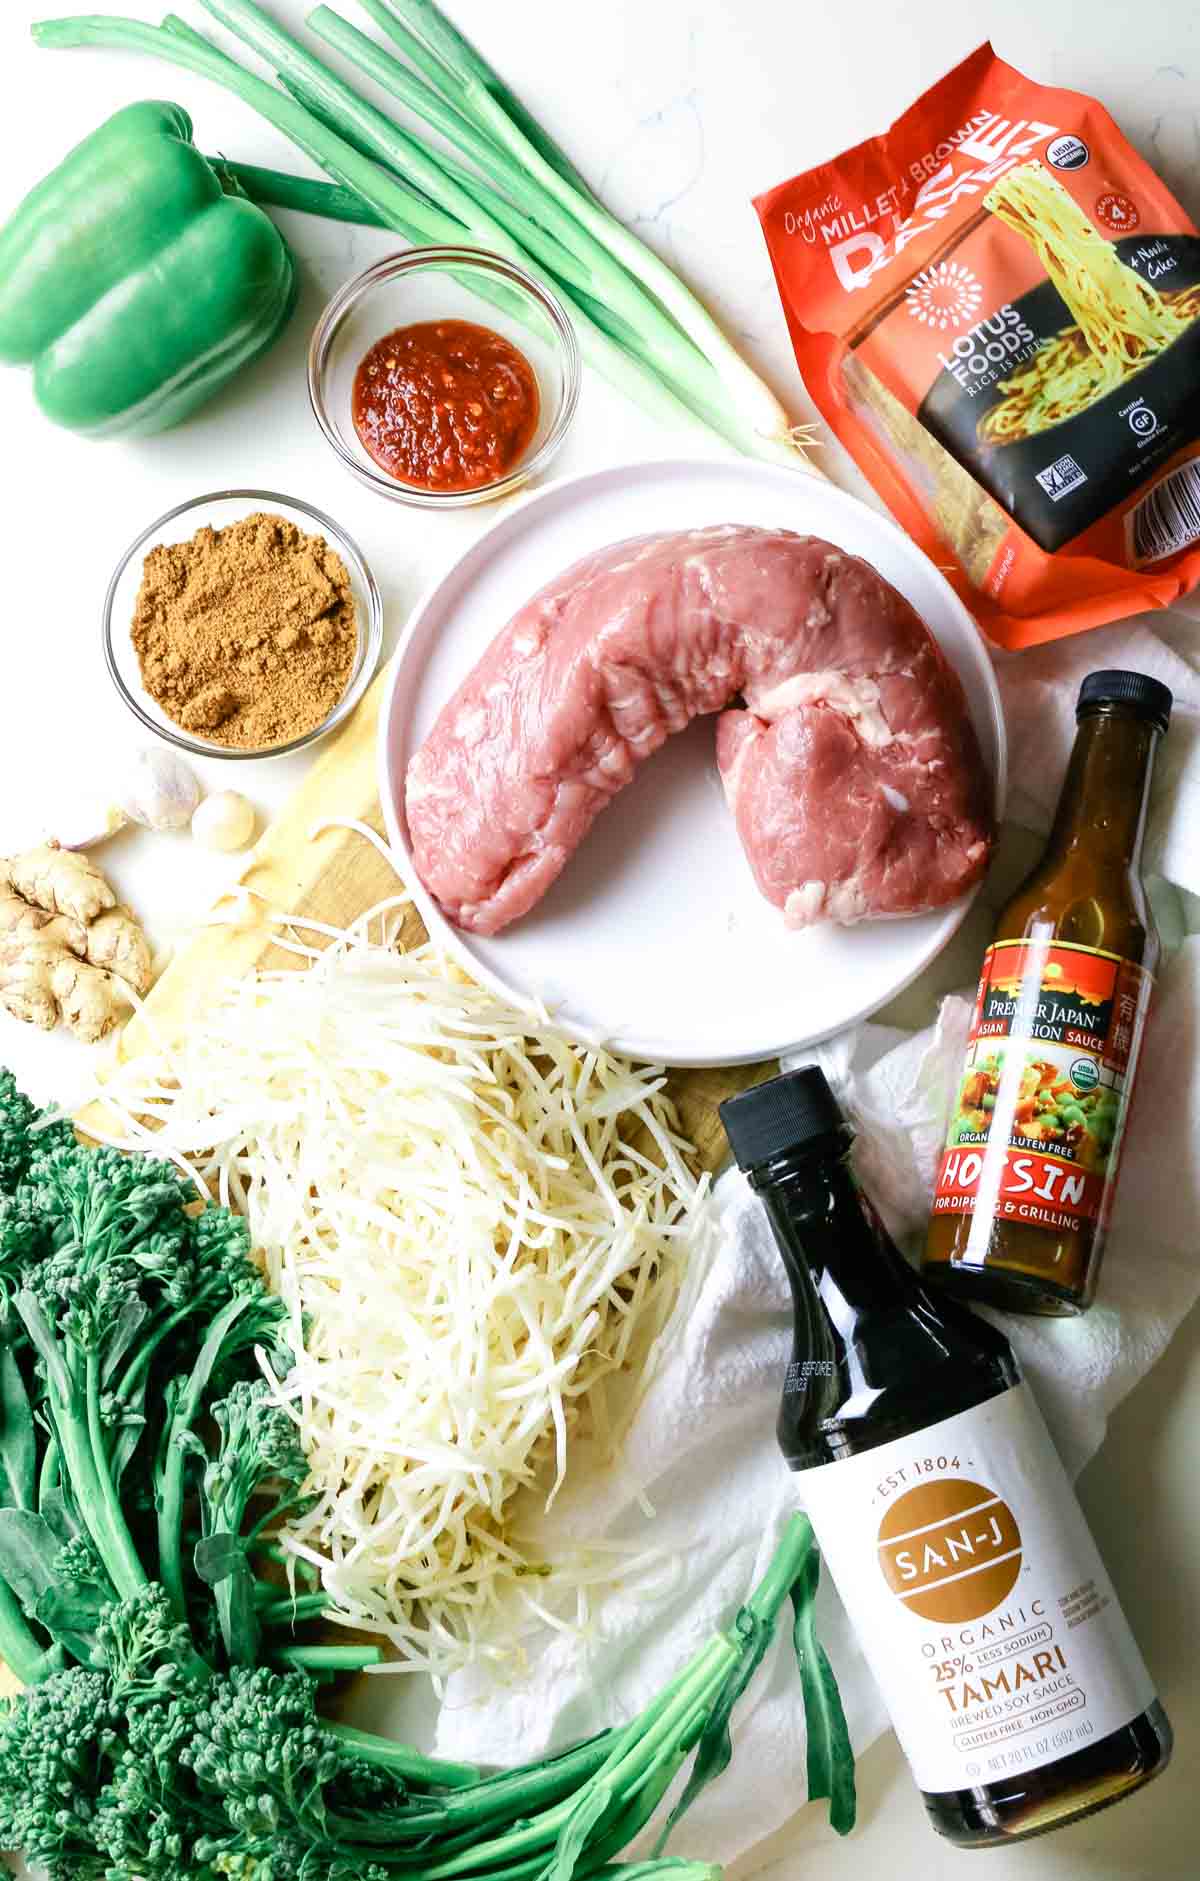 flat lay of spicy pork ingredients with pork tenderloin, broccoli, tamari, and more.